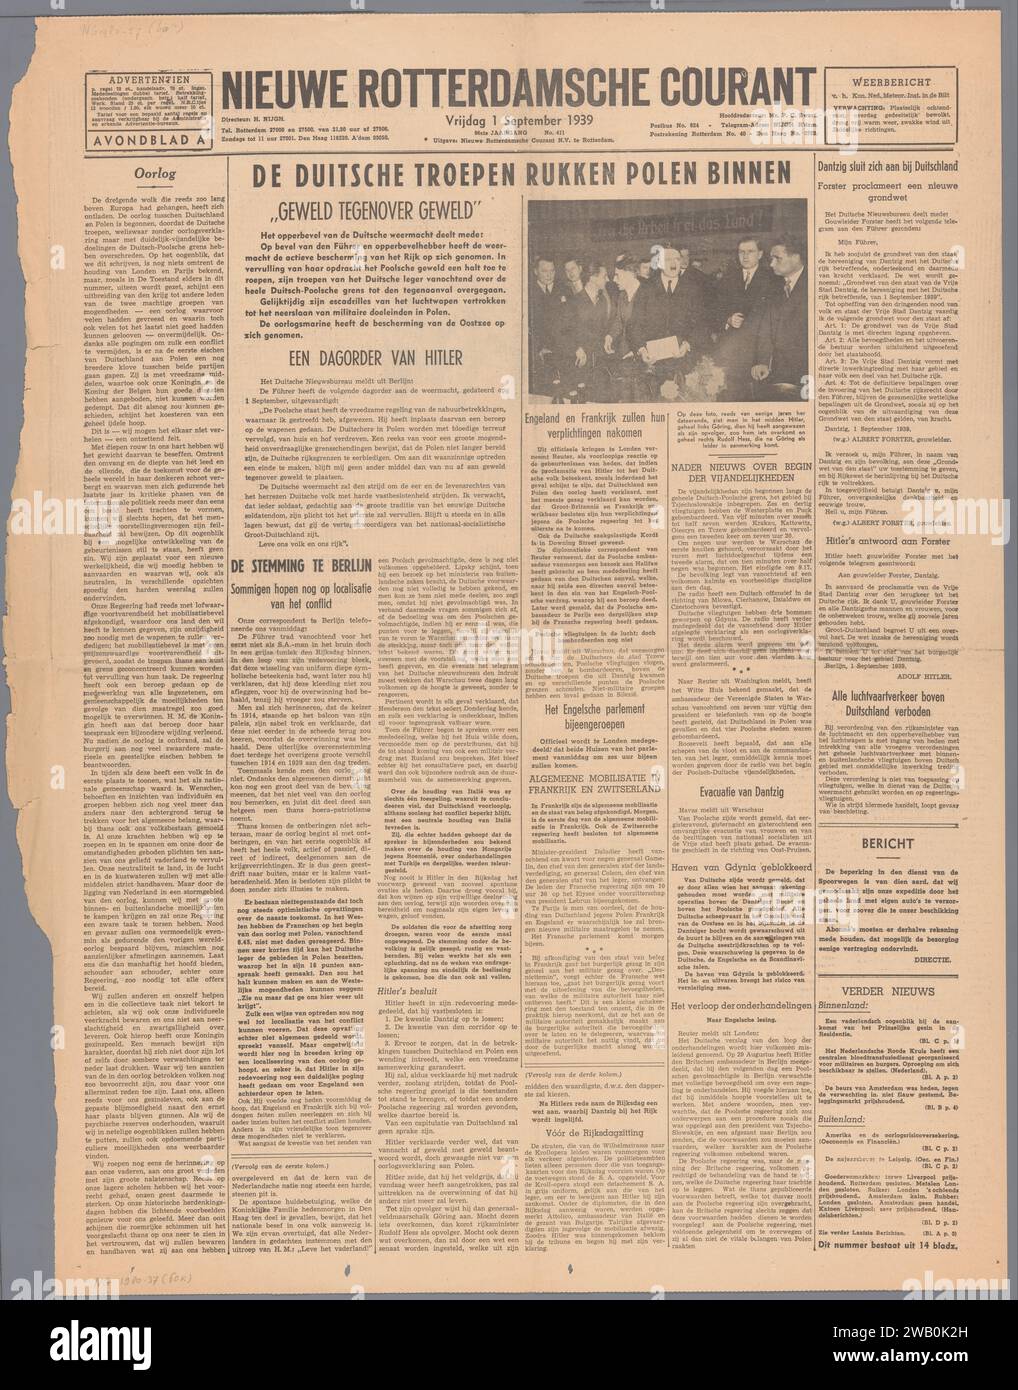 Nieuwe Rotterdamsche Courant, Nieuwe Rotterdamsche Courant, 1939  Newspaper about the German invasion in Poland, p. 1 & 2 of No. 411, 96th volume of the NRC. Rotterdam paper printing  Poland Stock Photo